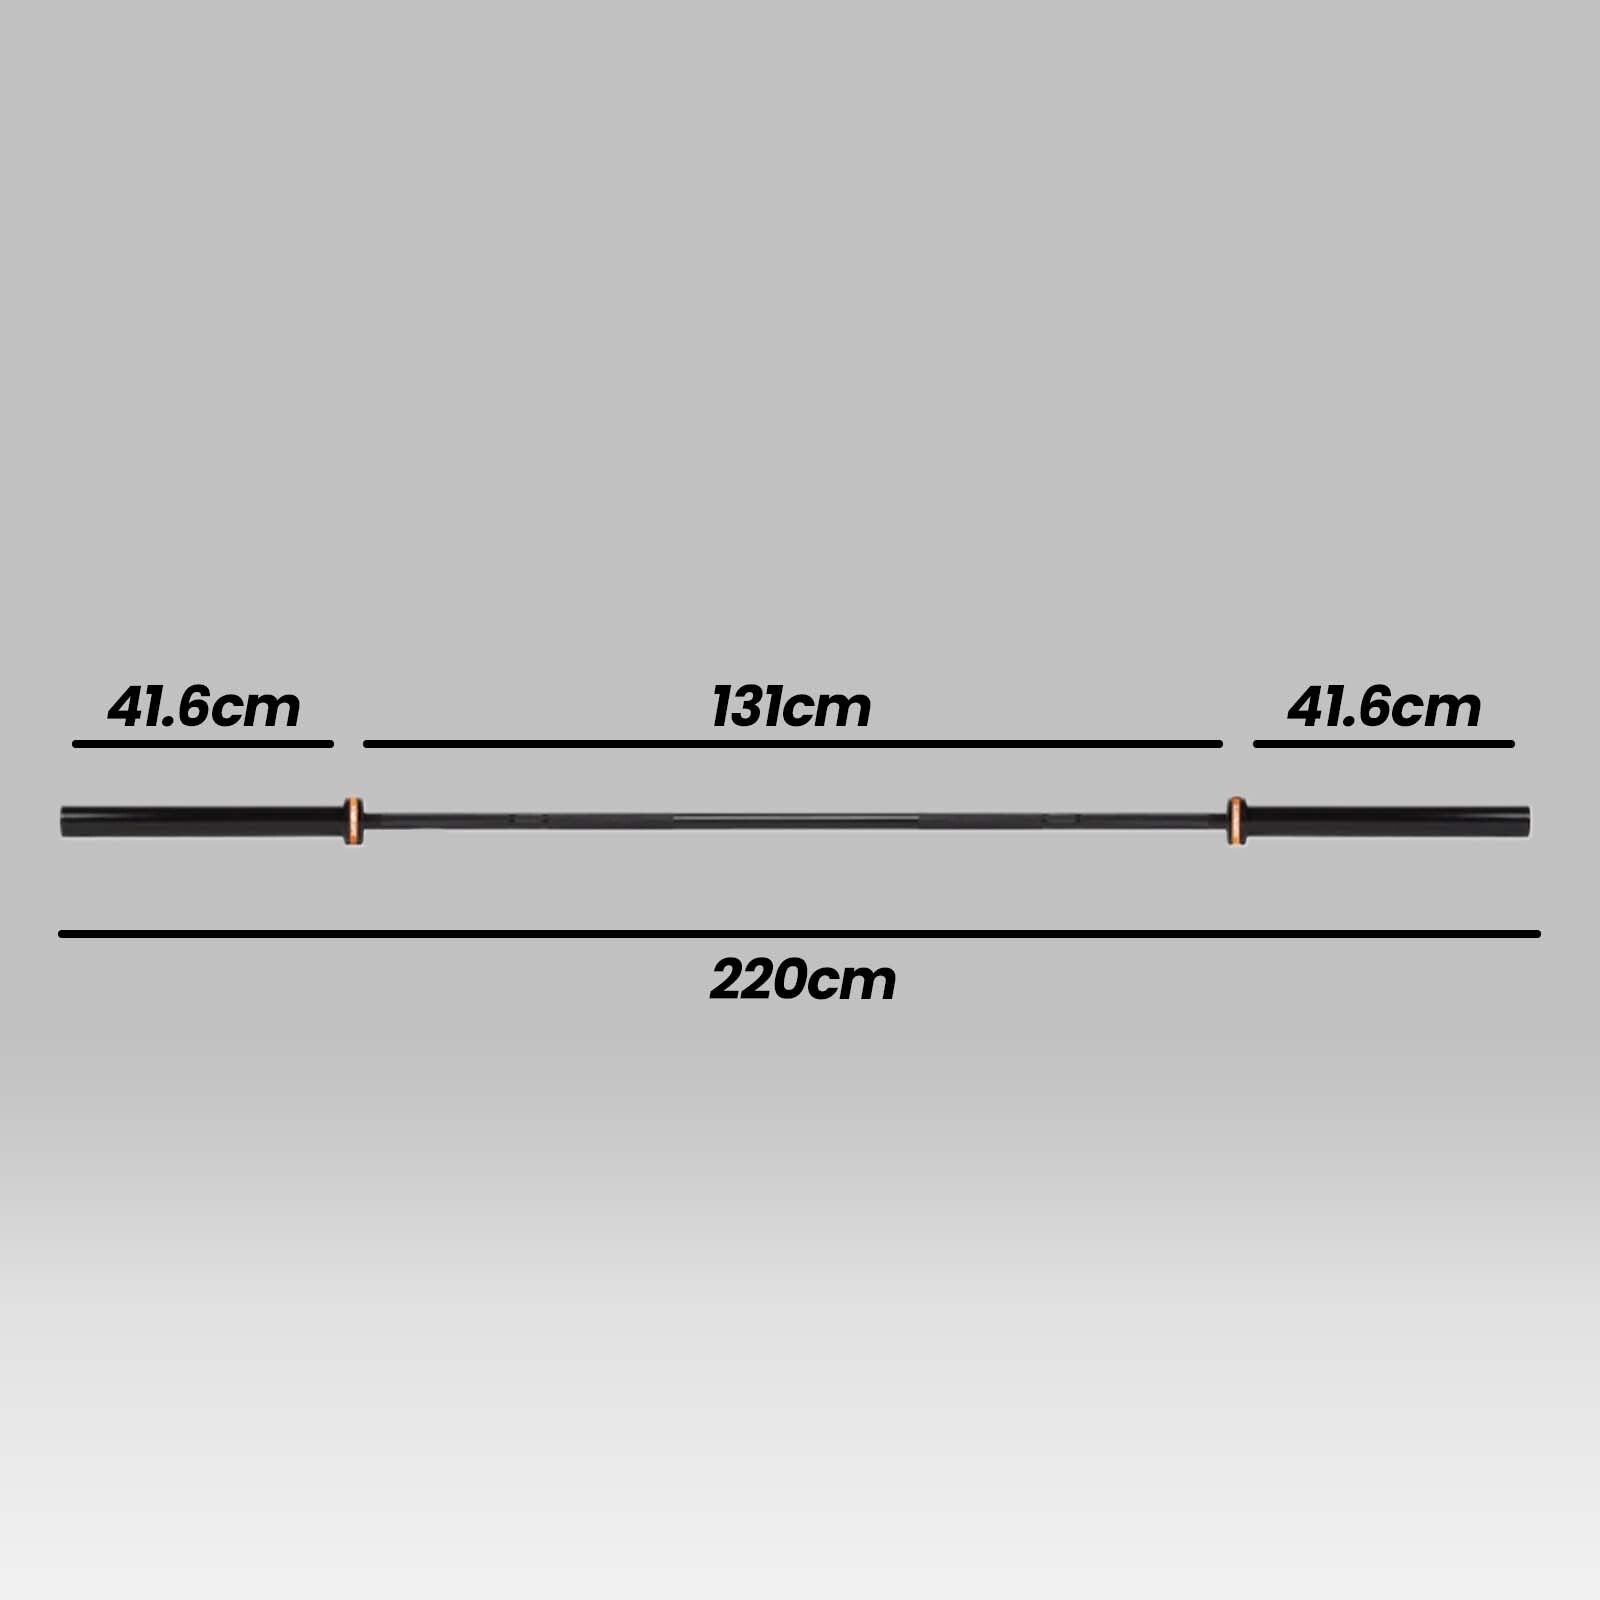 20kg Olympic Barbell dimensions